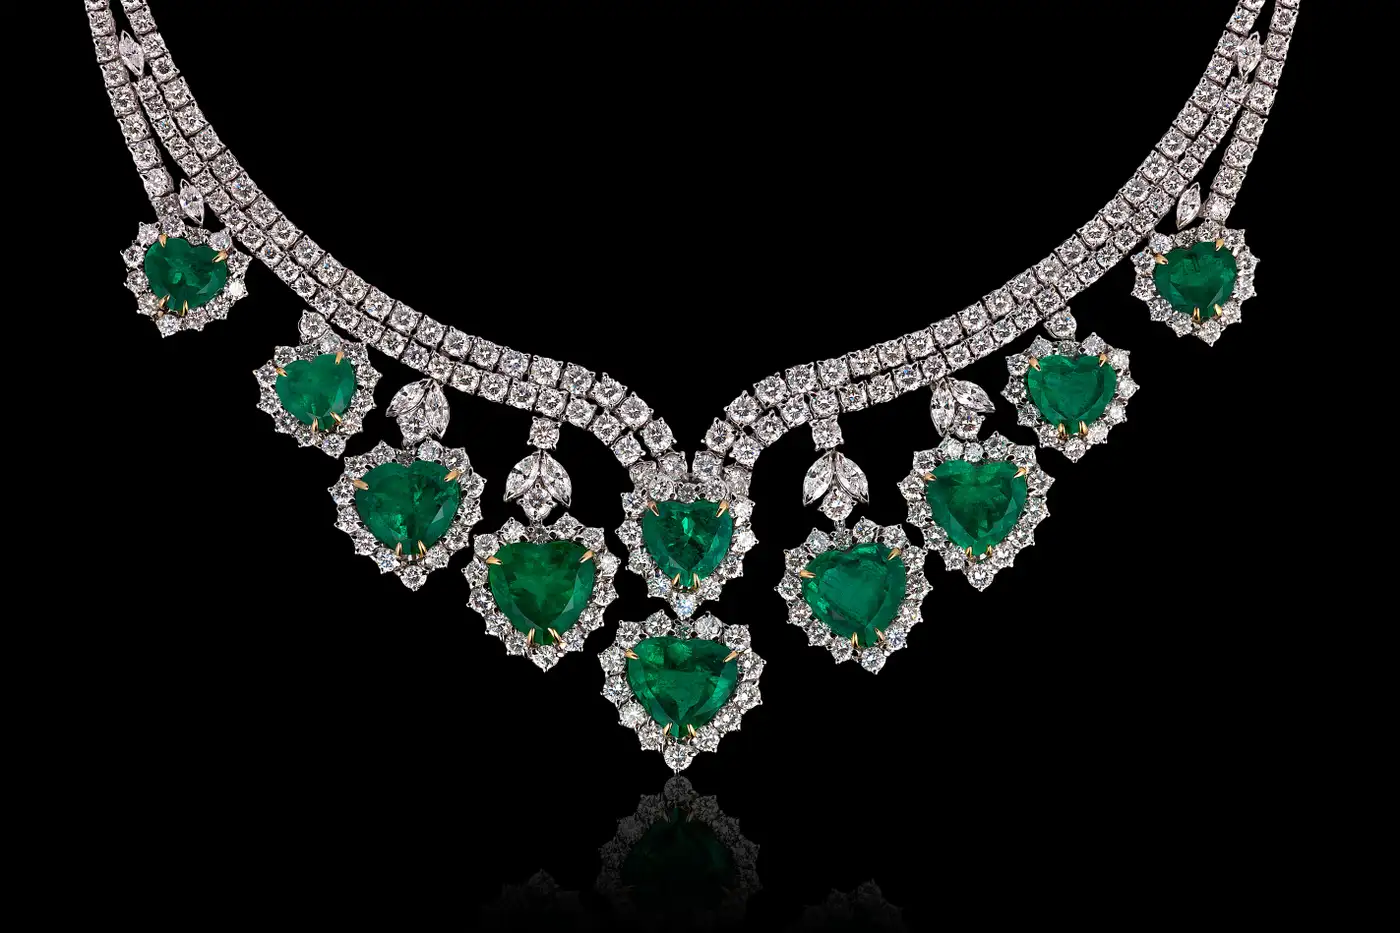 Andreoli-Heart-Shape-Colombian-Emerald-Diamond-Necklace-CDC-Certified-18Kt-Gold-3.webp